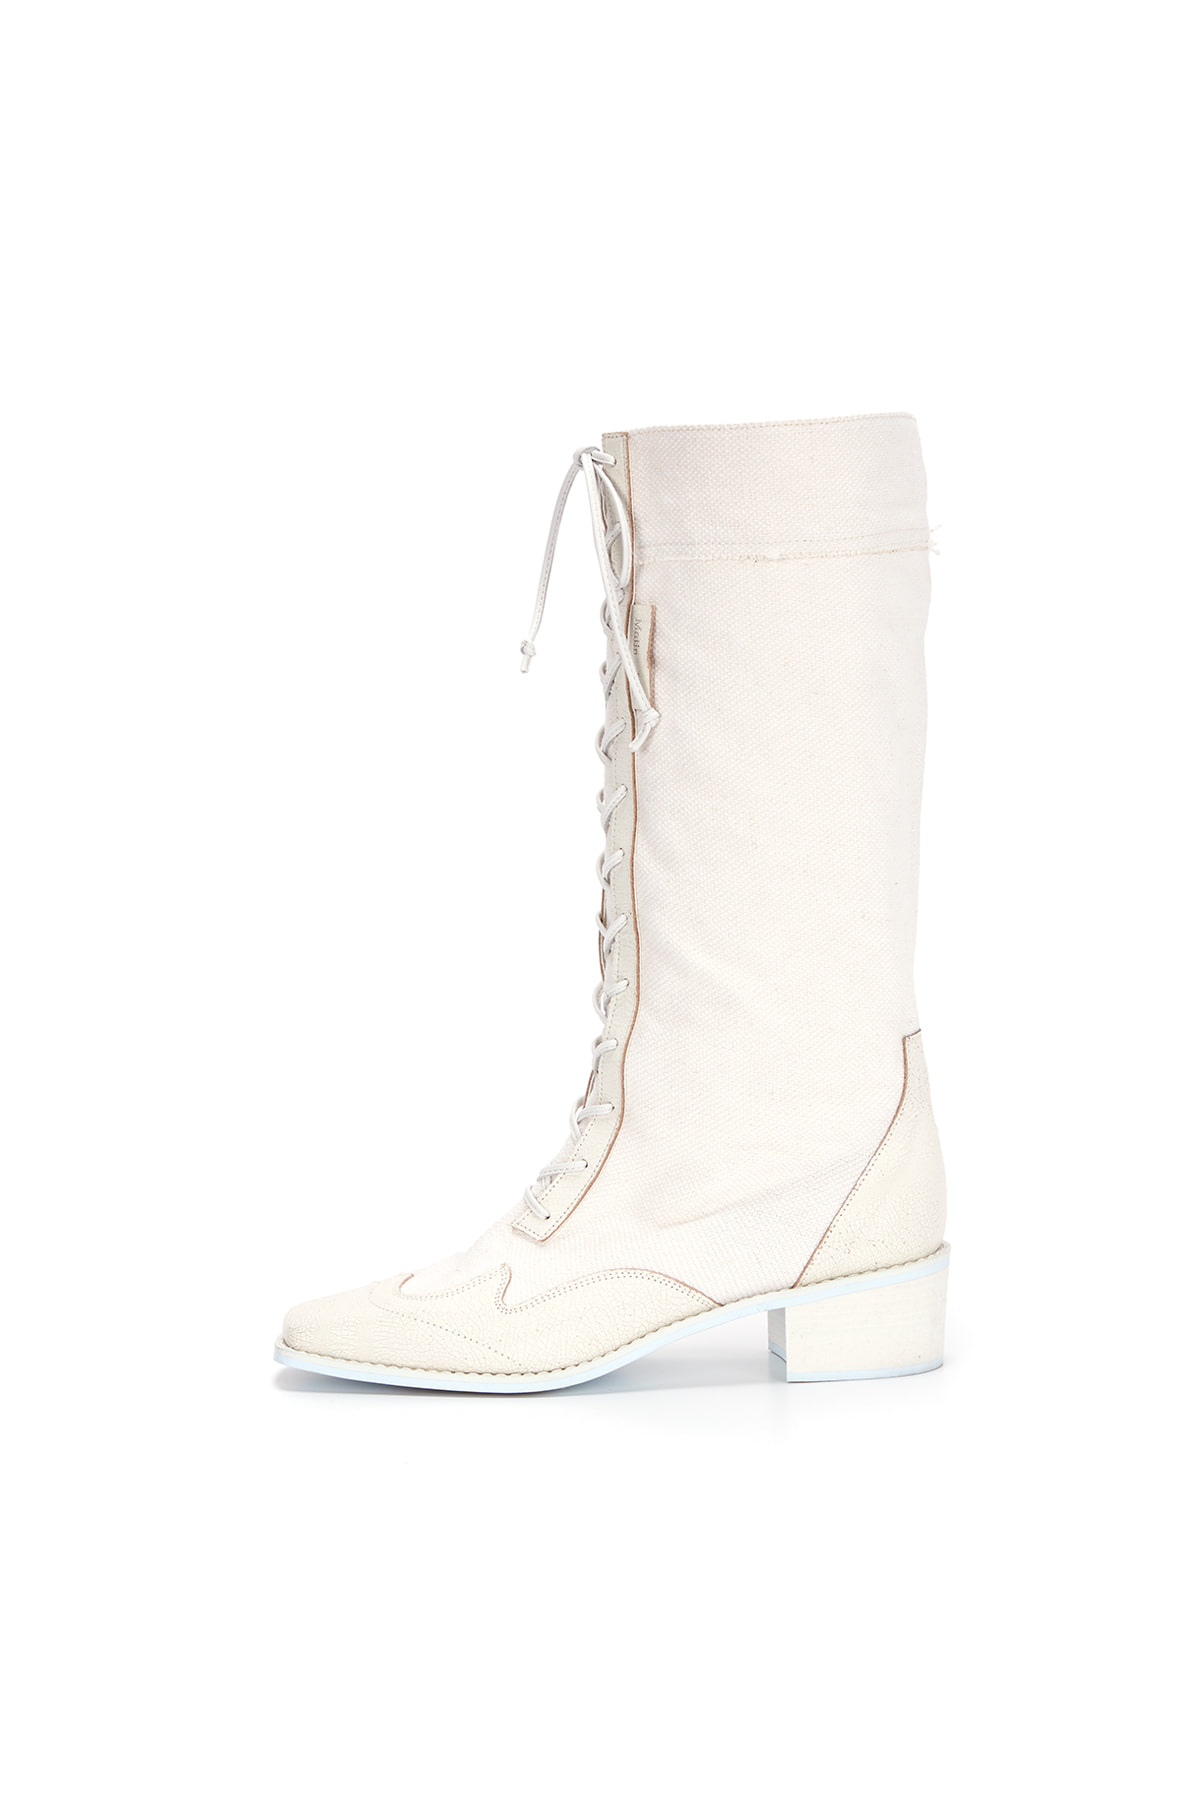 FRONT RACE UP BOOTS IN WHITE